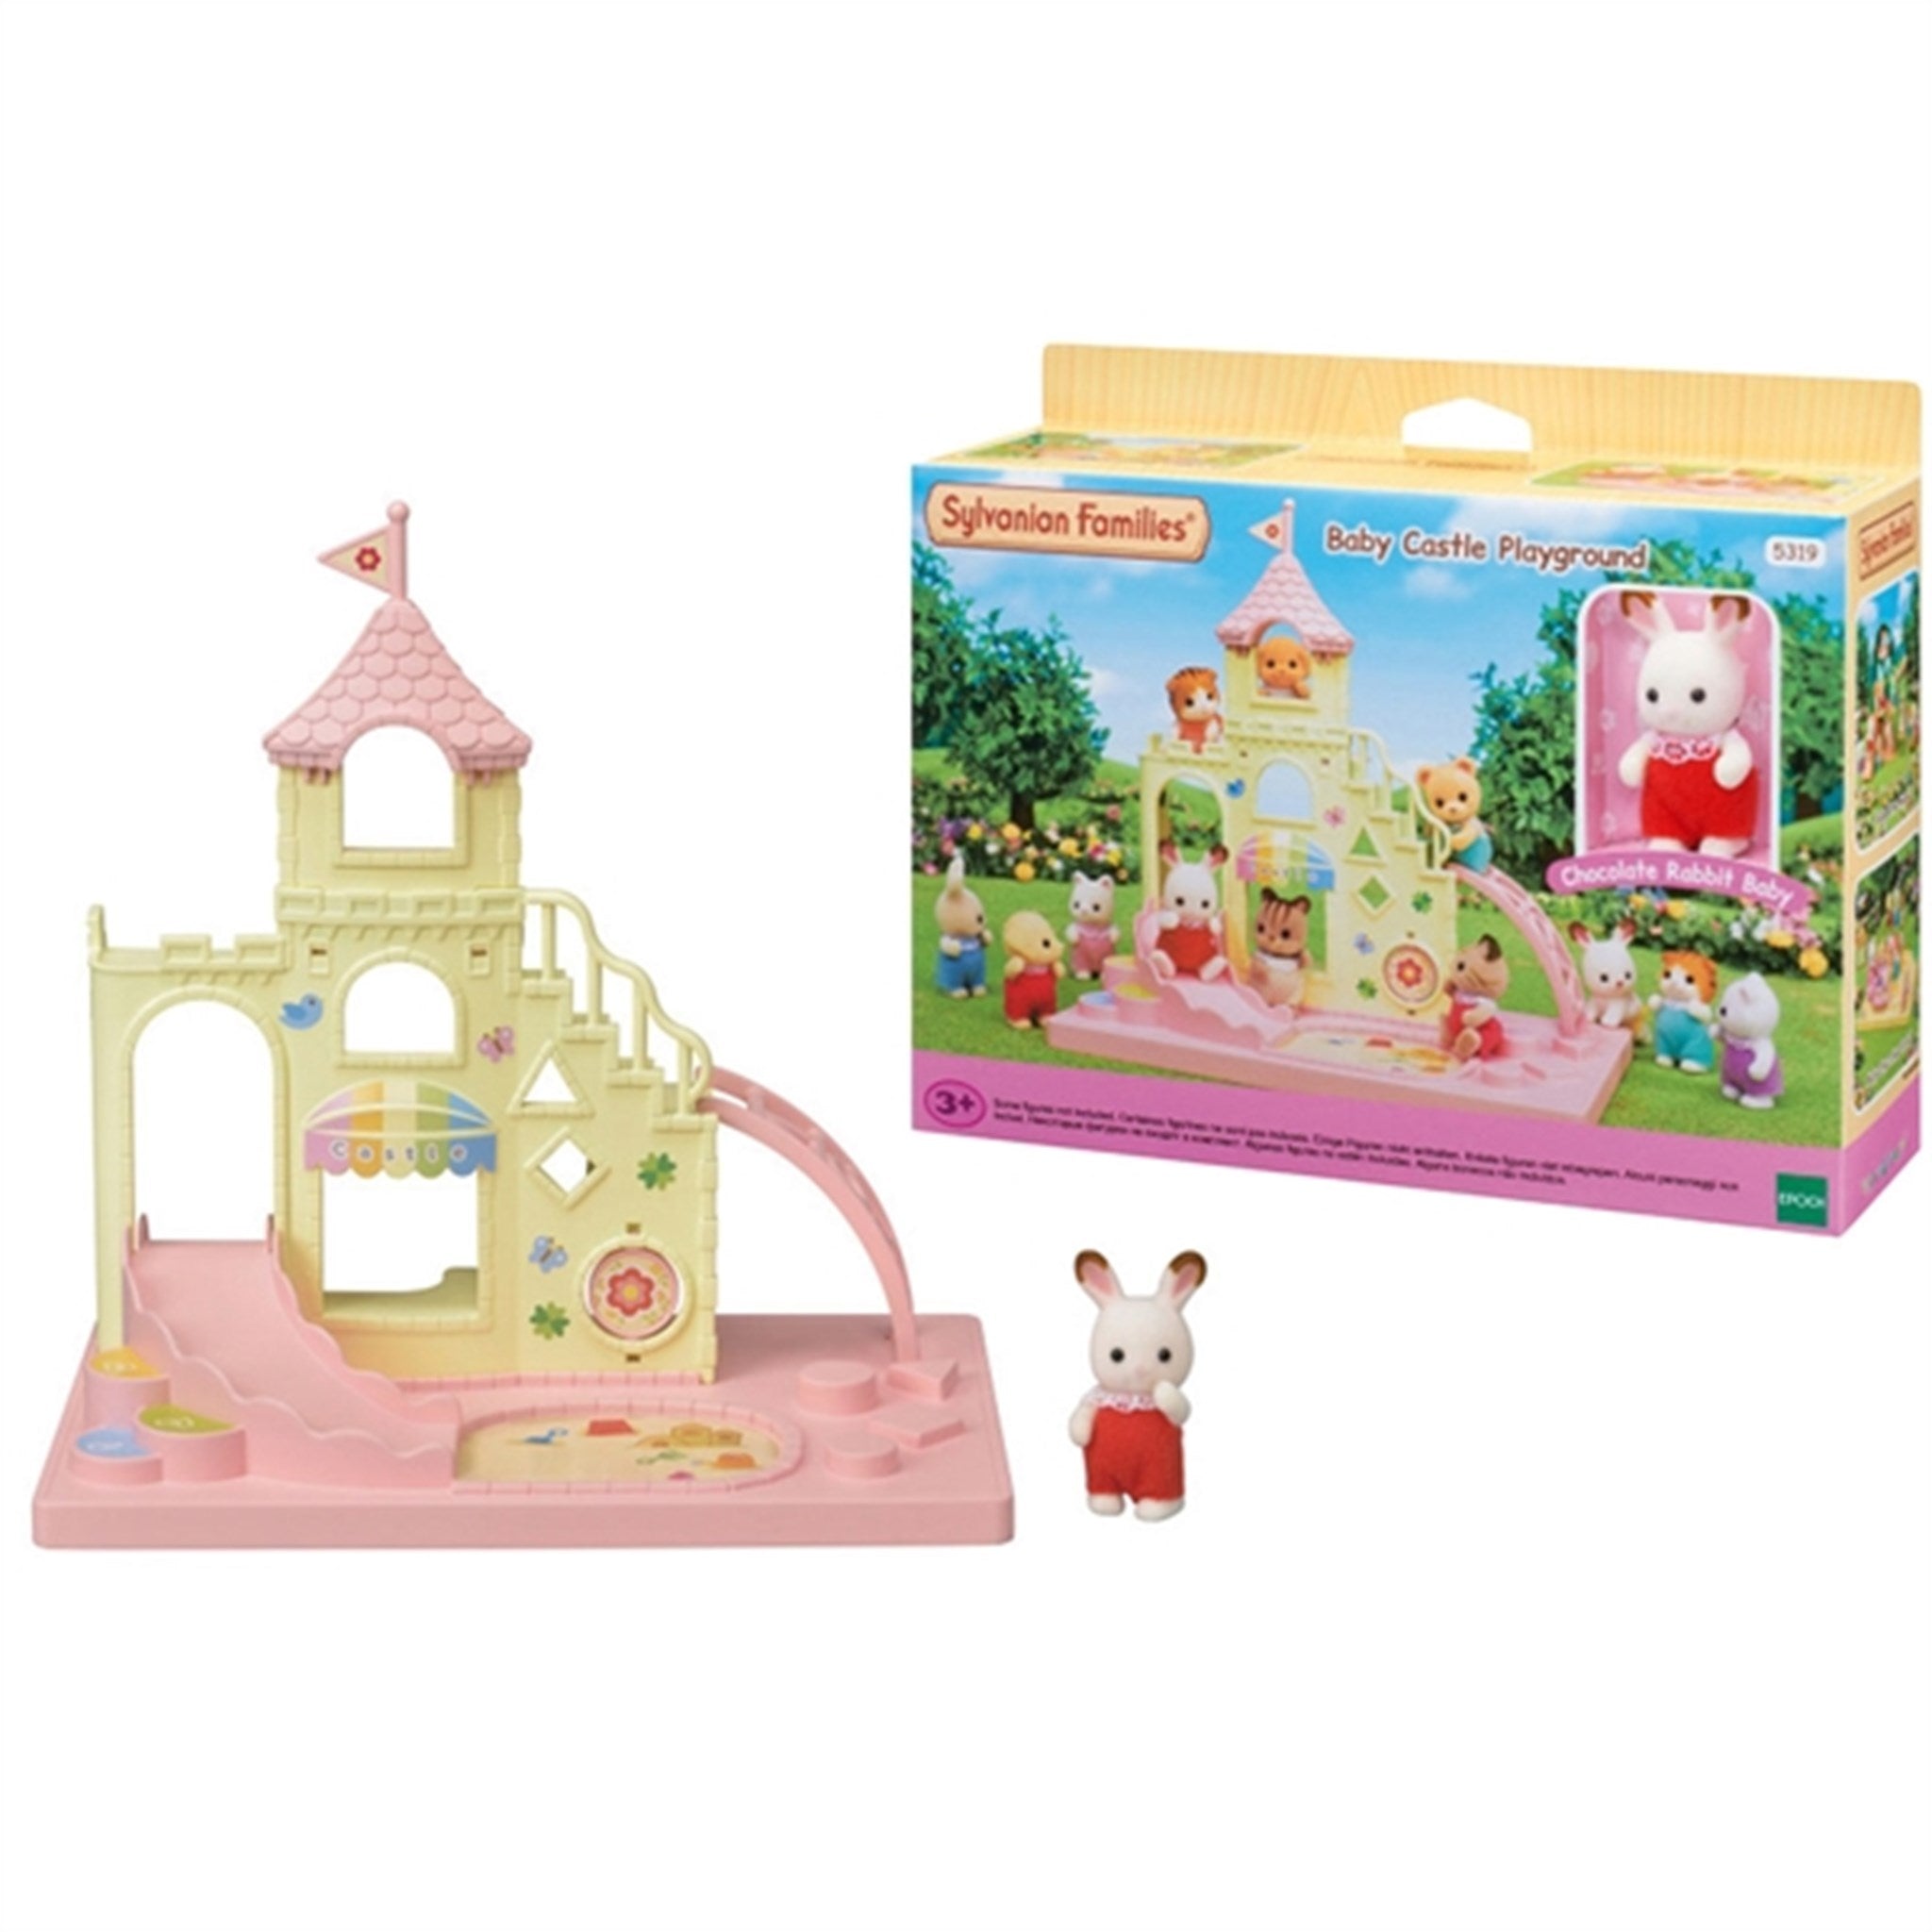 Sylvanian Families Baby Castle Playground 7